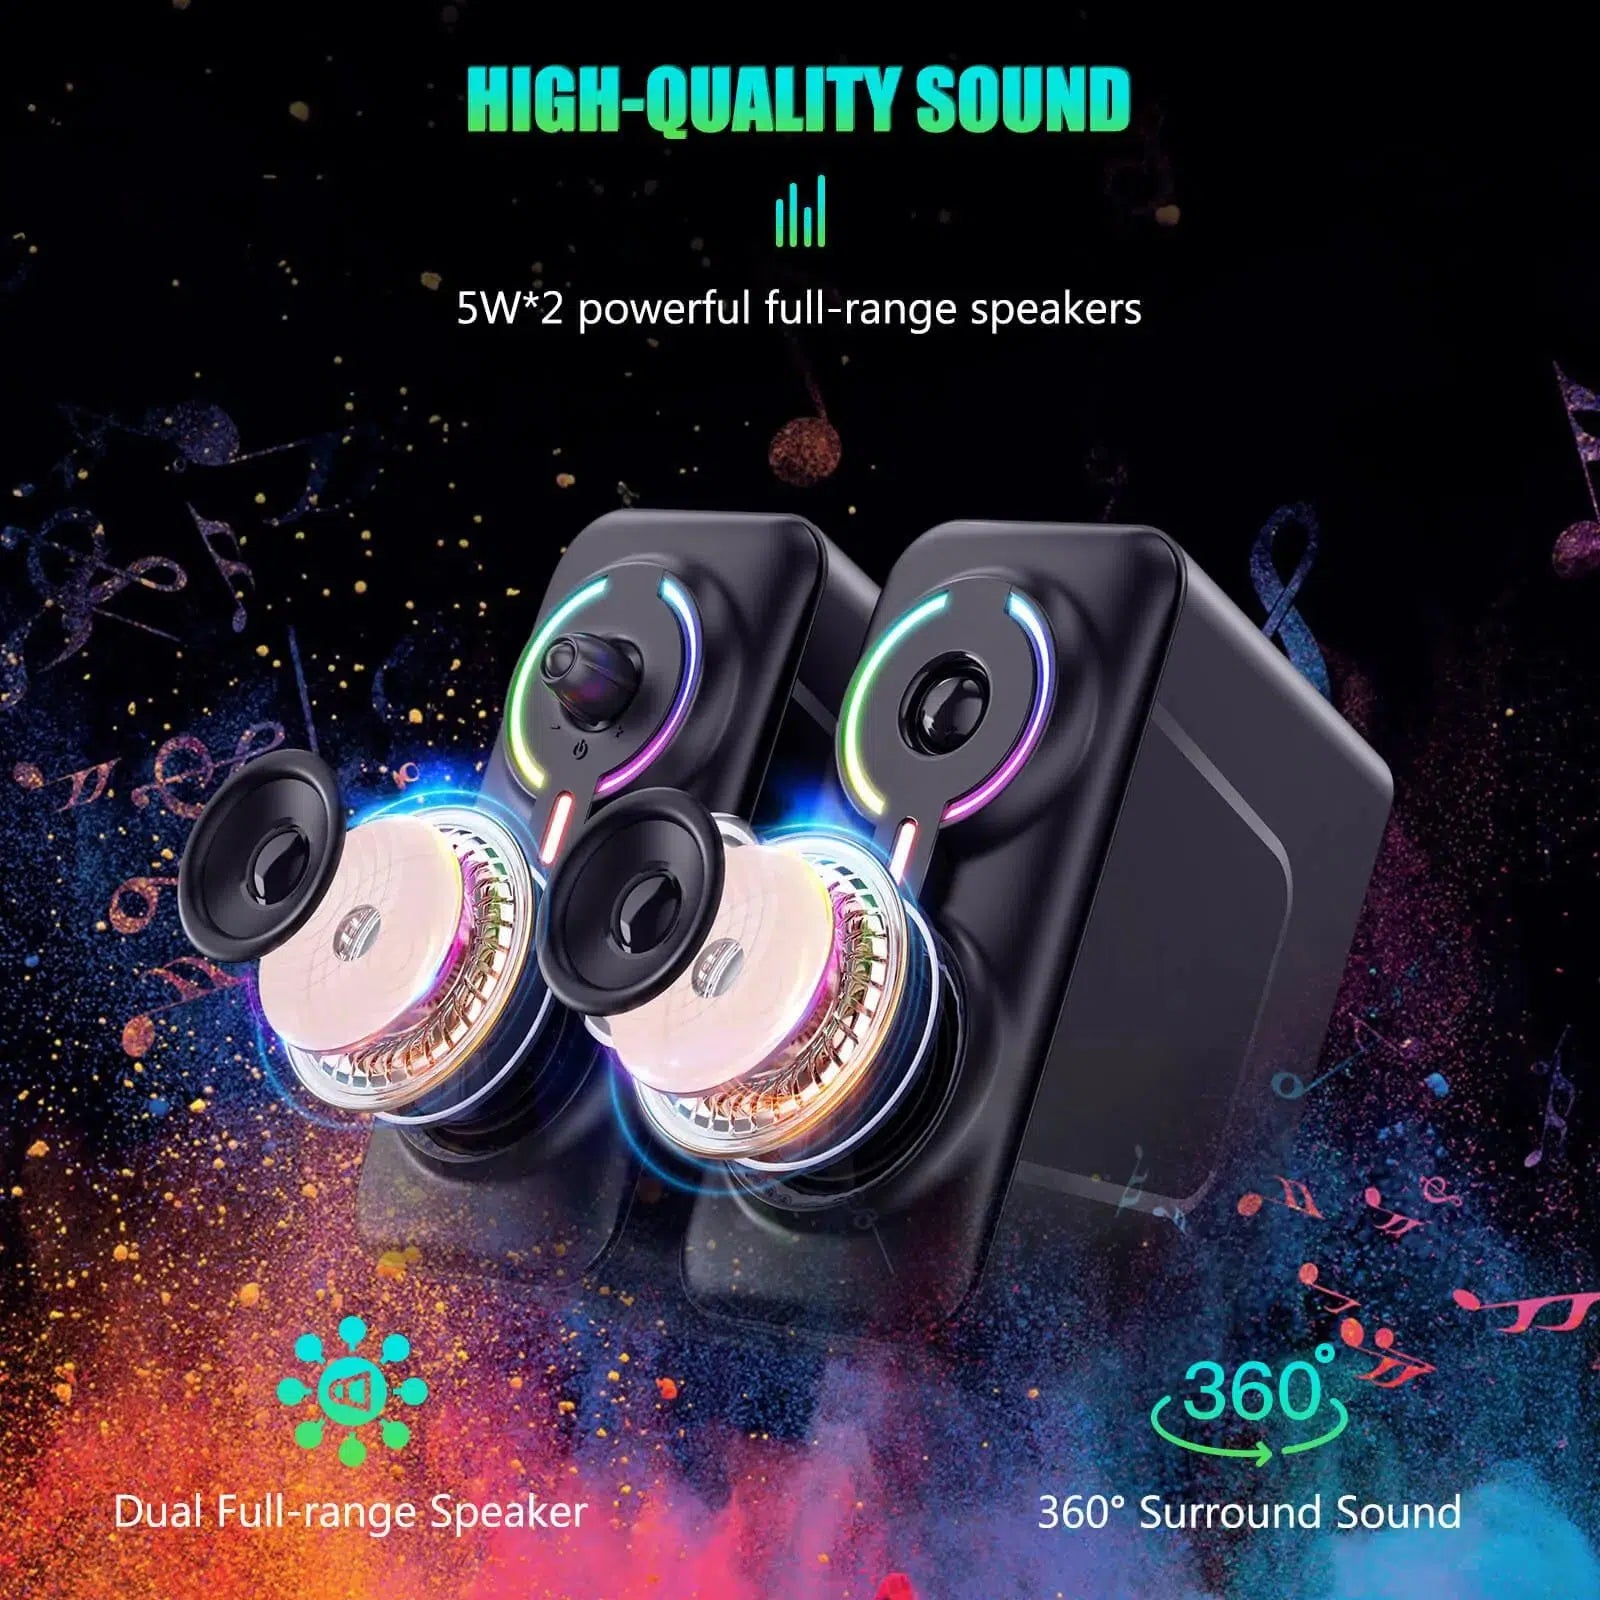 HIGH-QUALITY SOUND | ONIKUMA L6 Multimedia Gaming Speaker with BT5.0 and AUX Mode